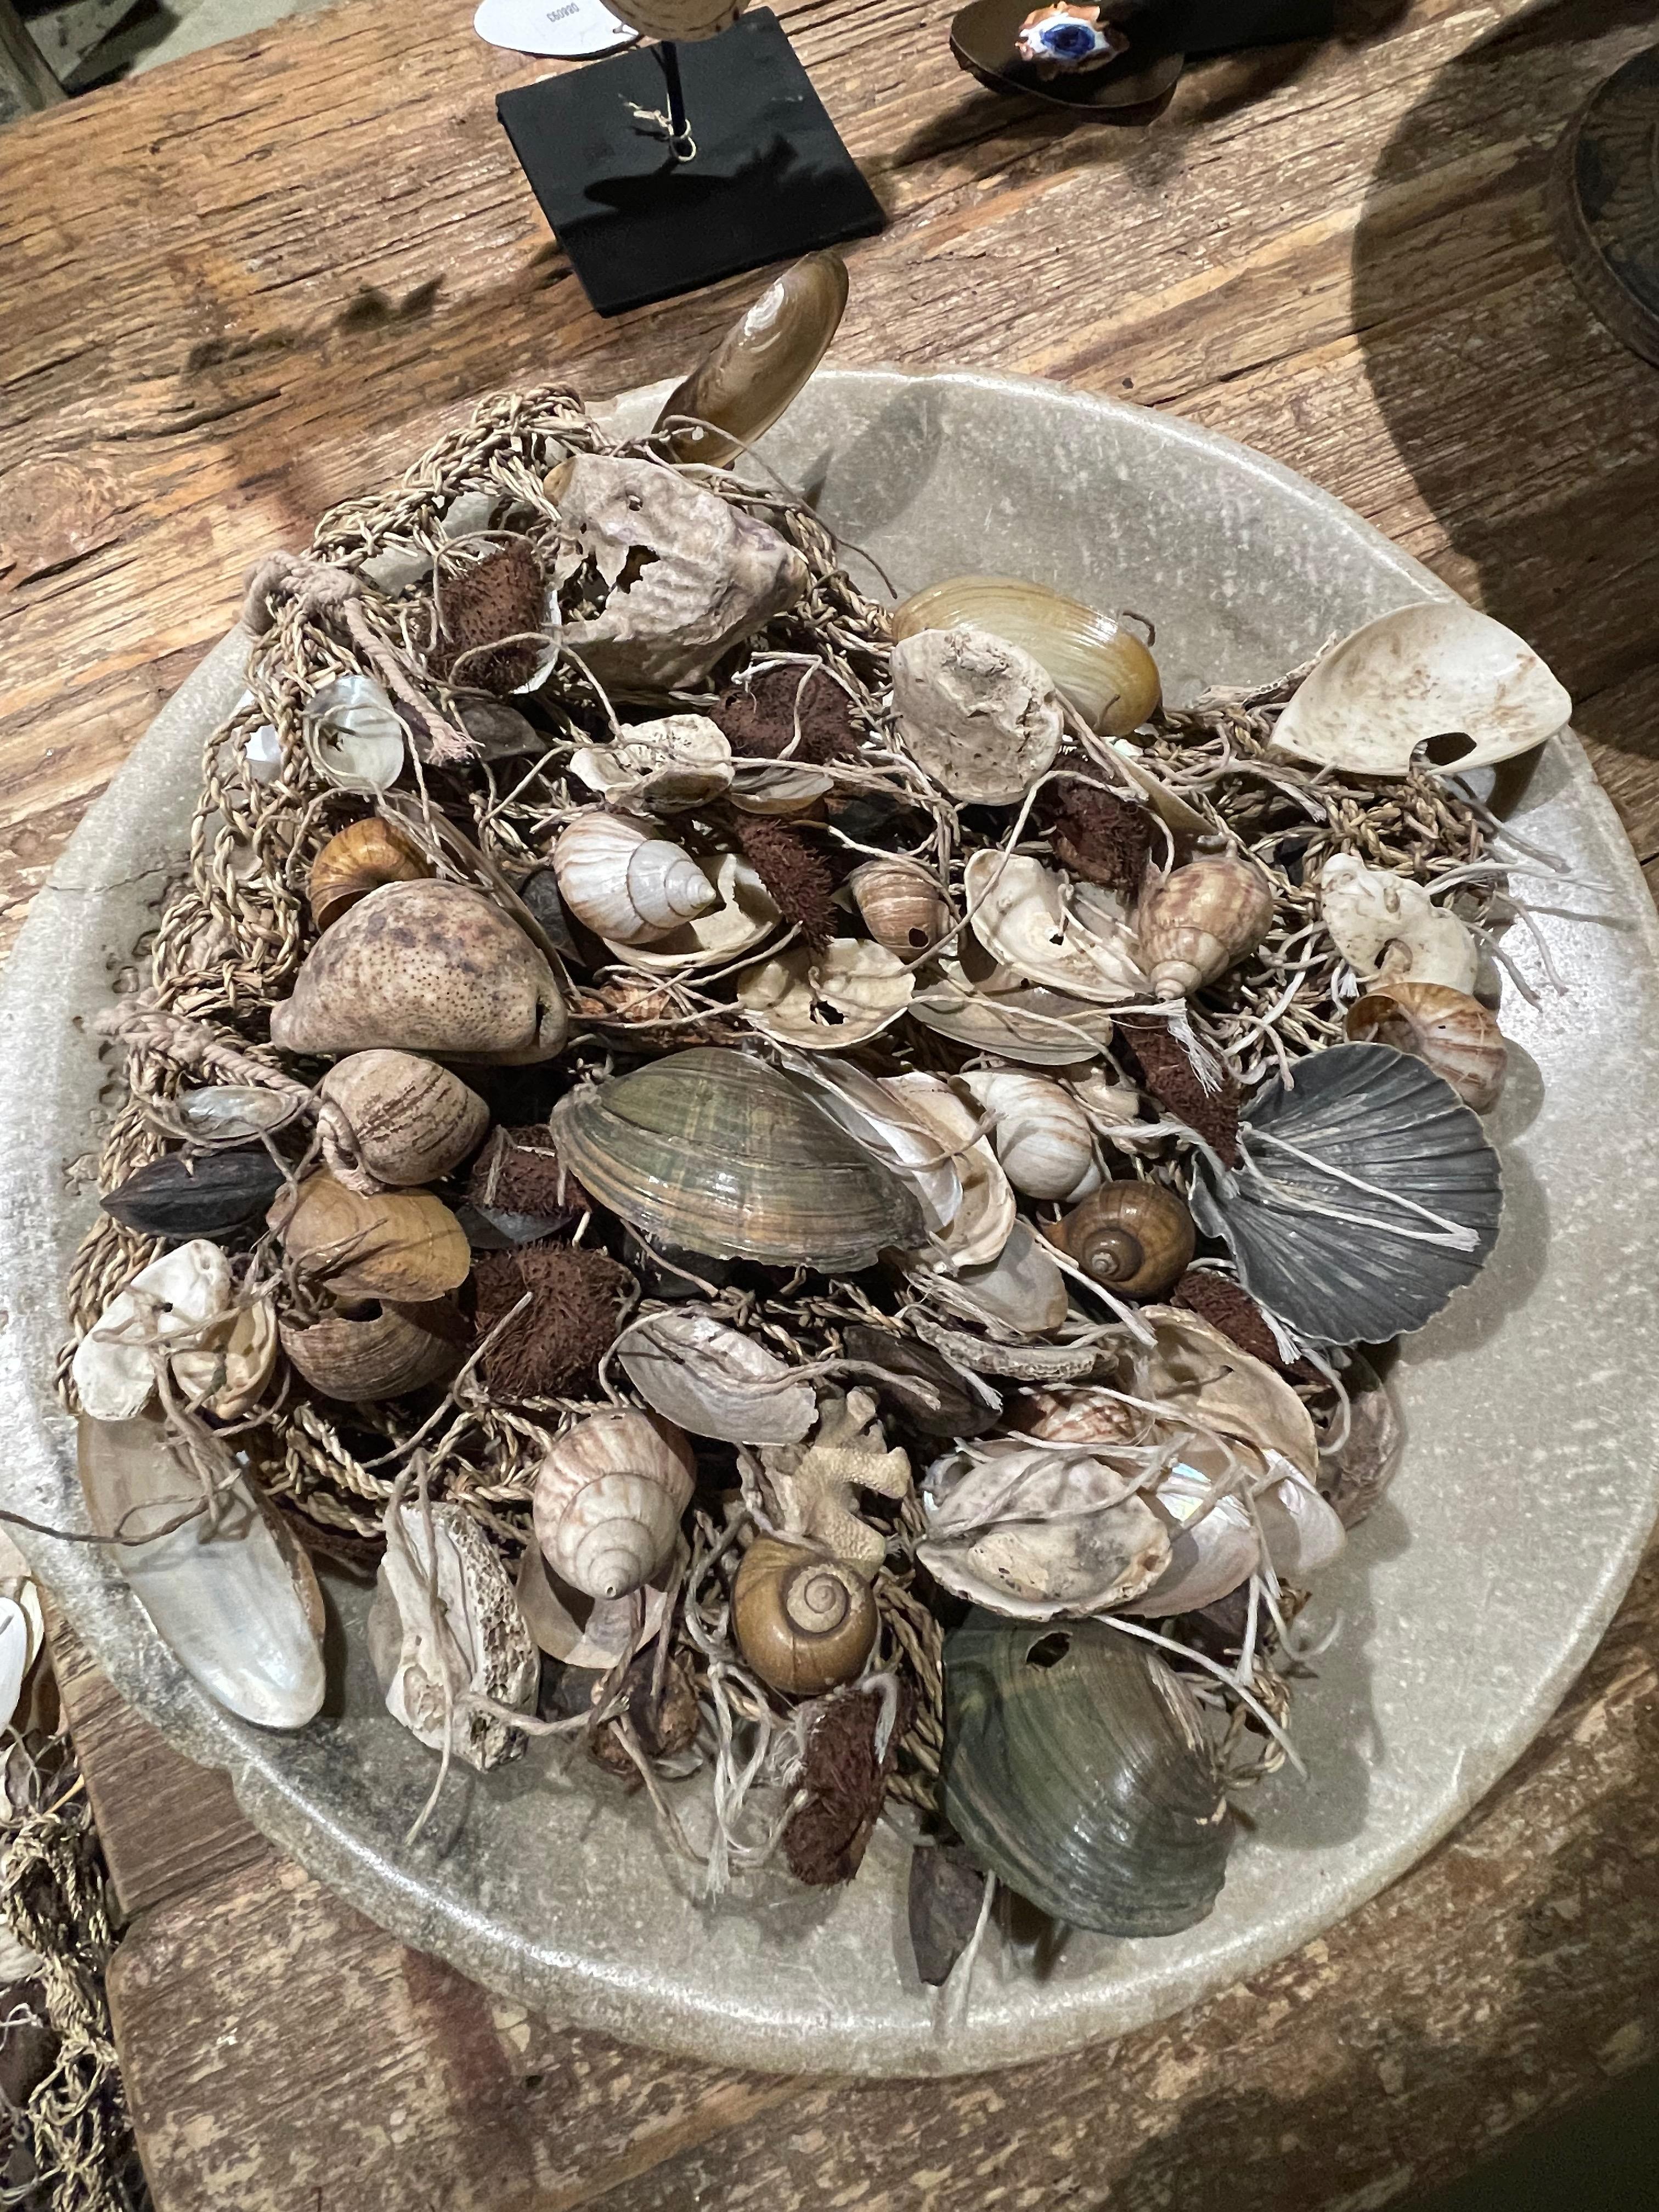 Contemporary Indonesian purse made of a multitude of different shells.
All connected by natural twine.
Very decorative placed in a bowl.
ARRIVING APRIL